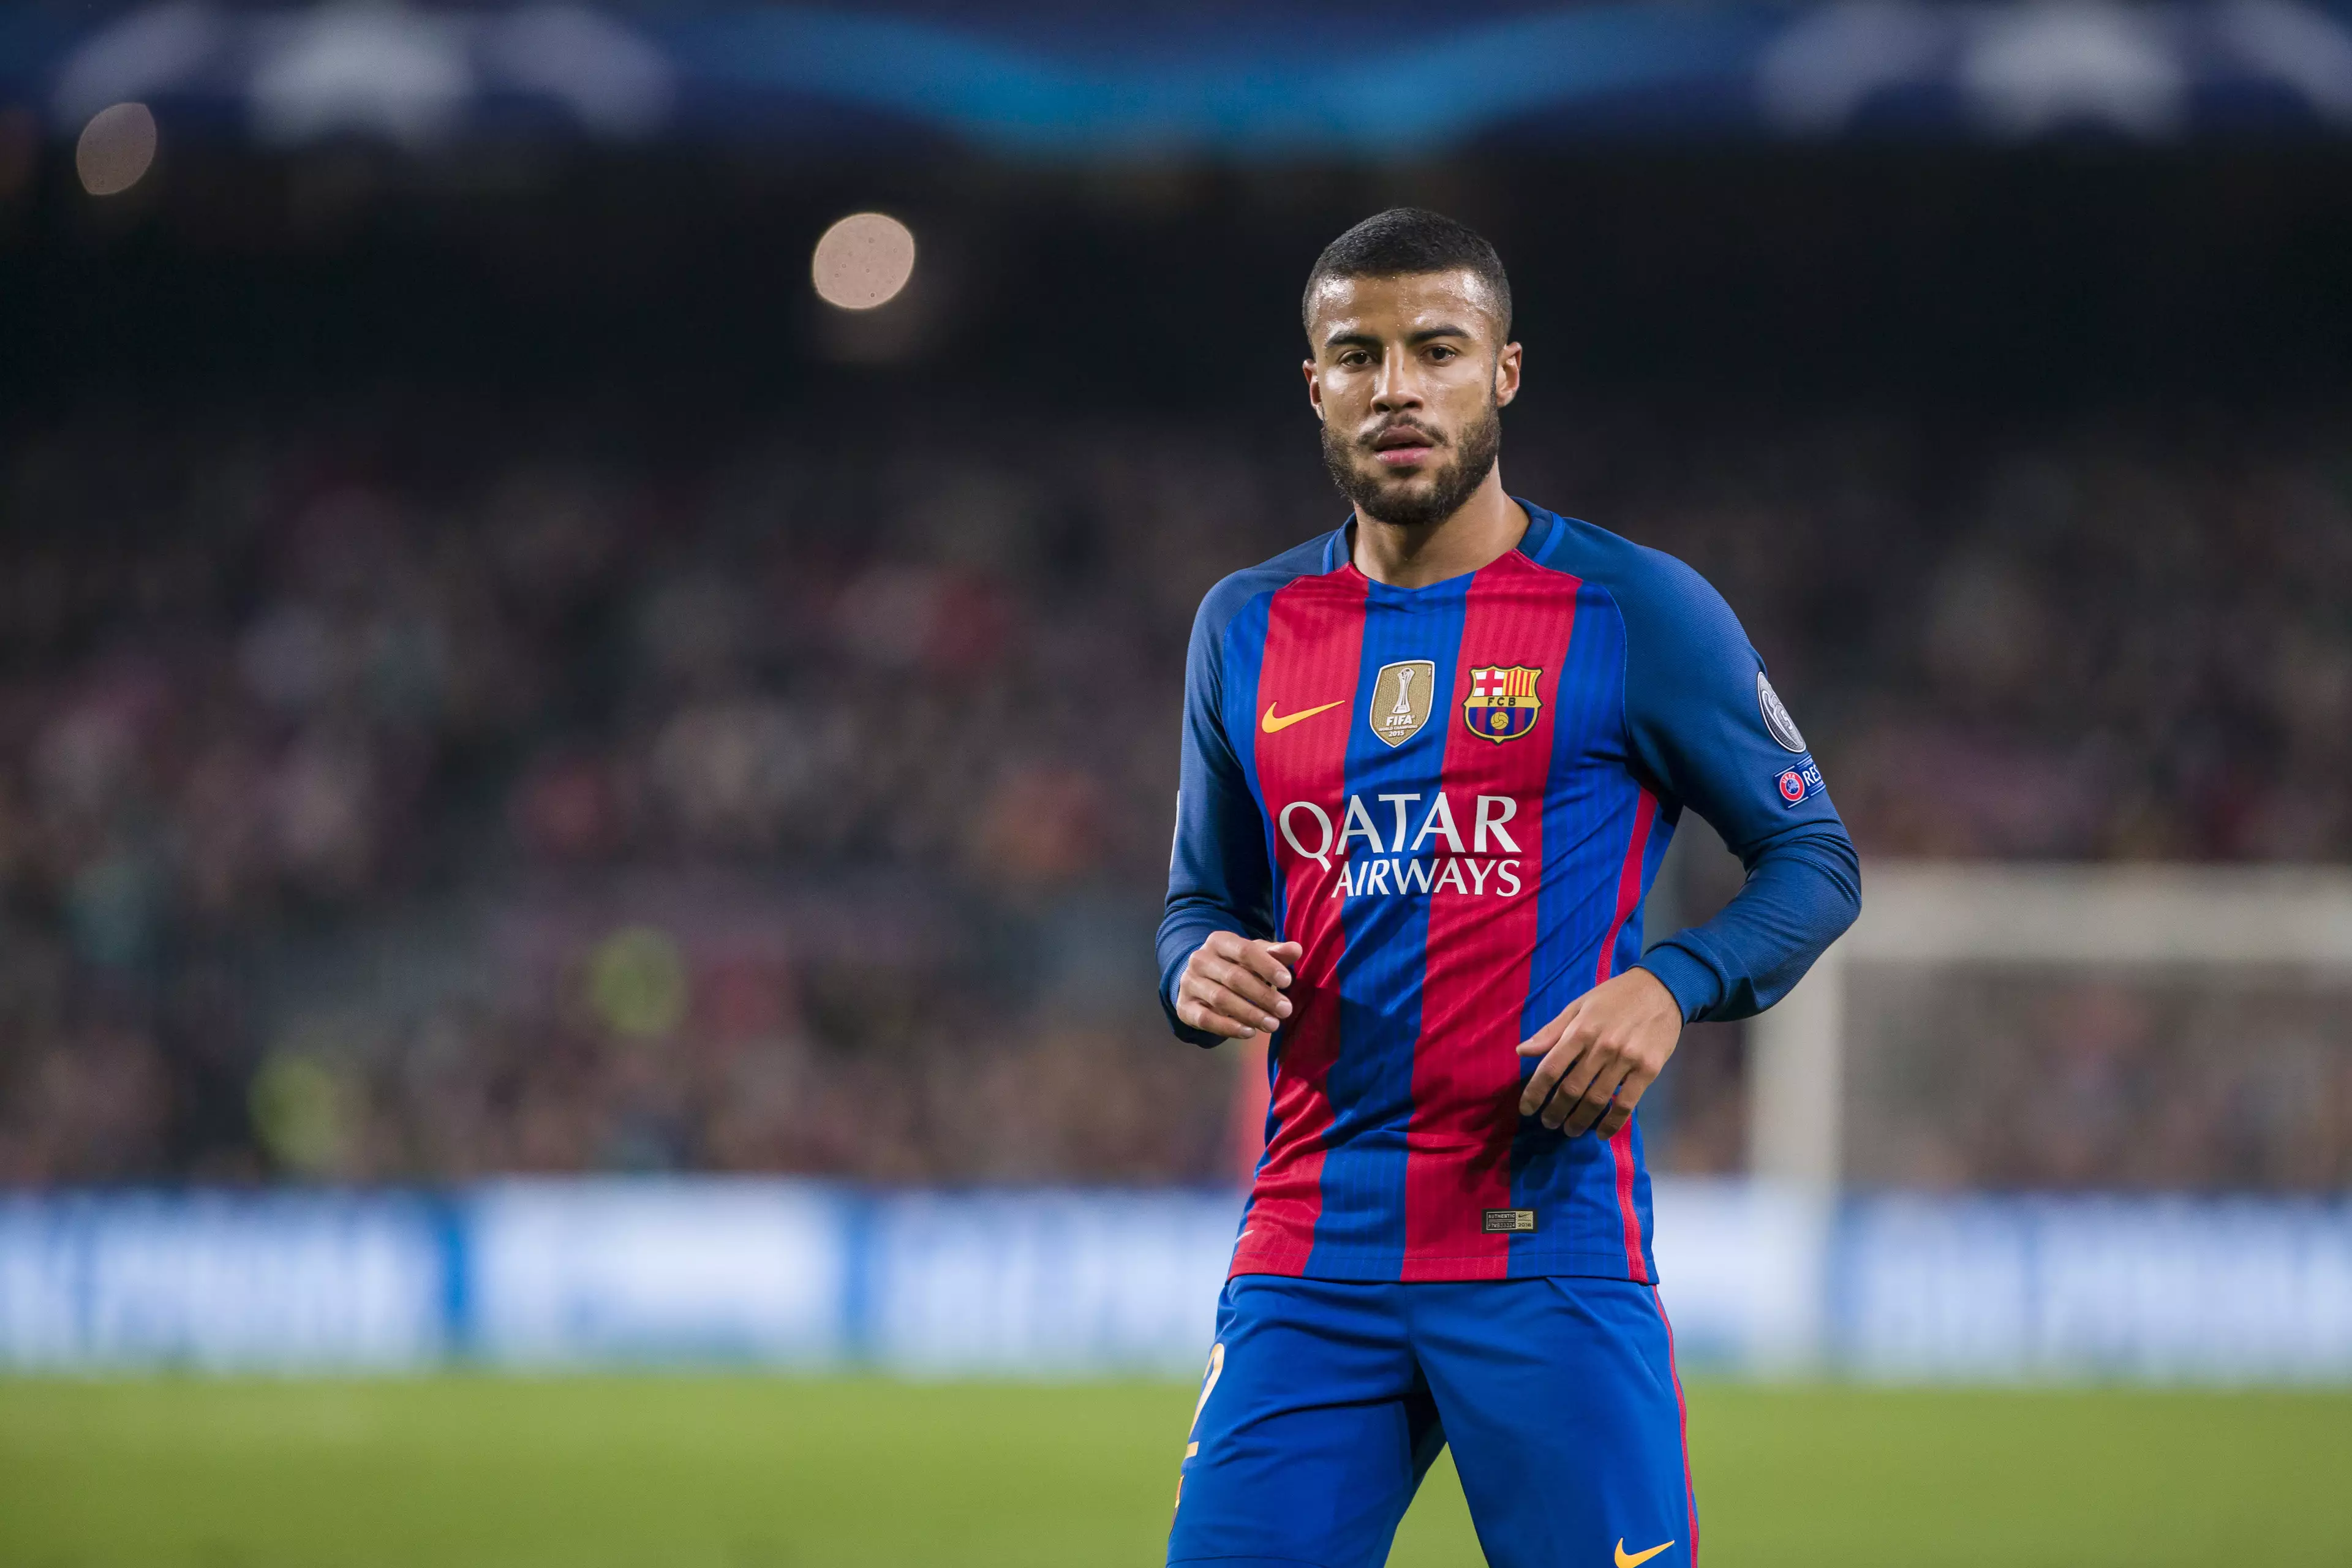 The Barcelona midfielder could soon be on his way to the San Siro. Image: PA Images.